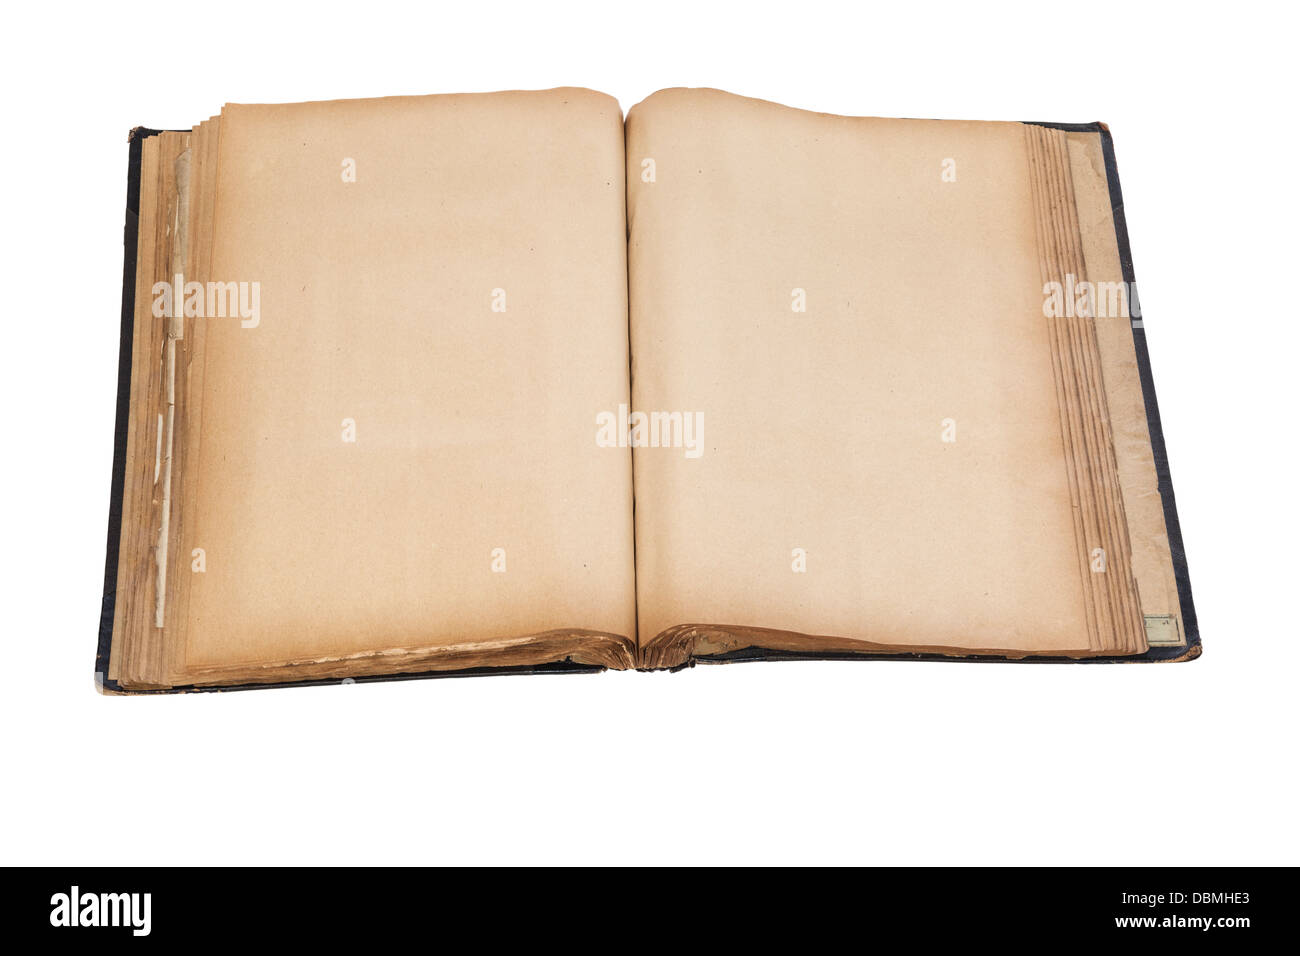 Old Scrap Book - old scrap book or album, over 100 years old, open at blank pages. Clipping path. Stock Photo